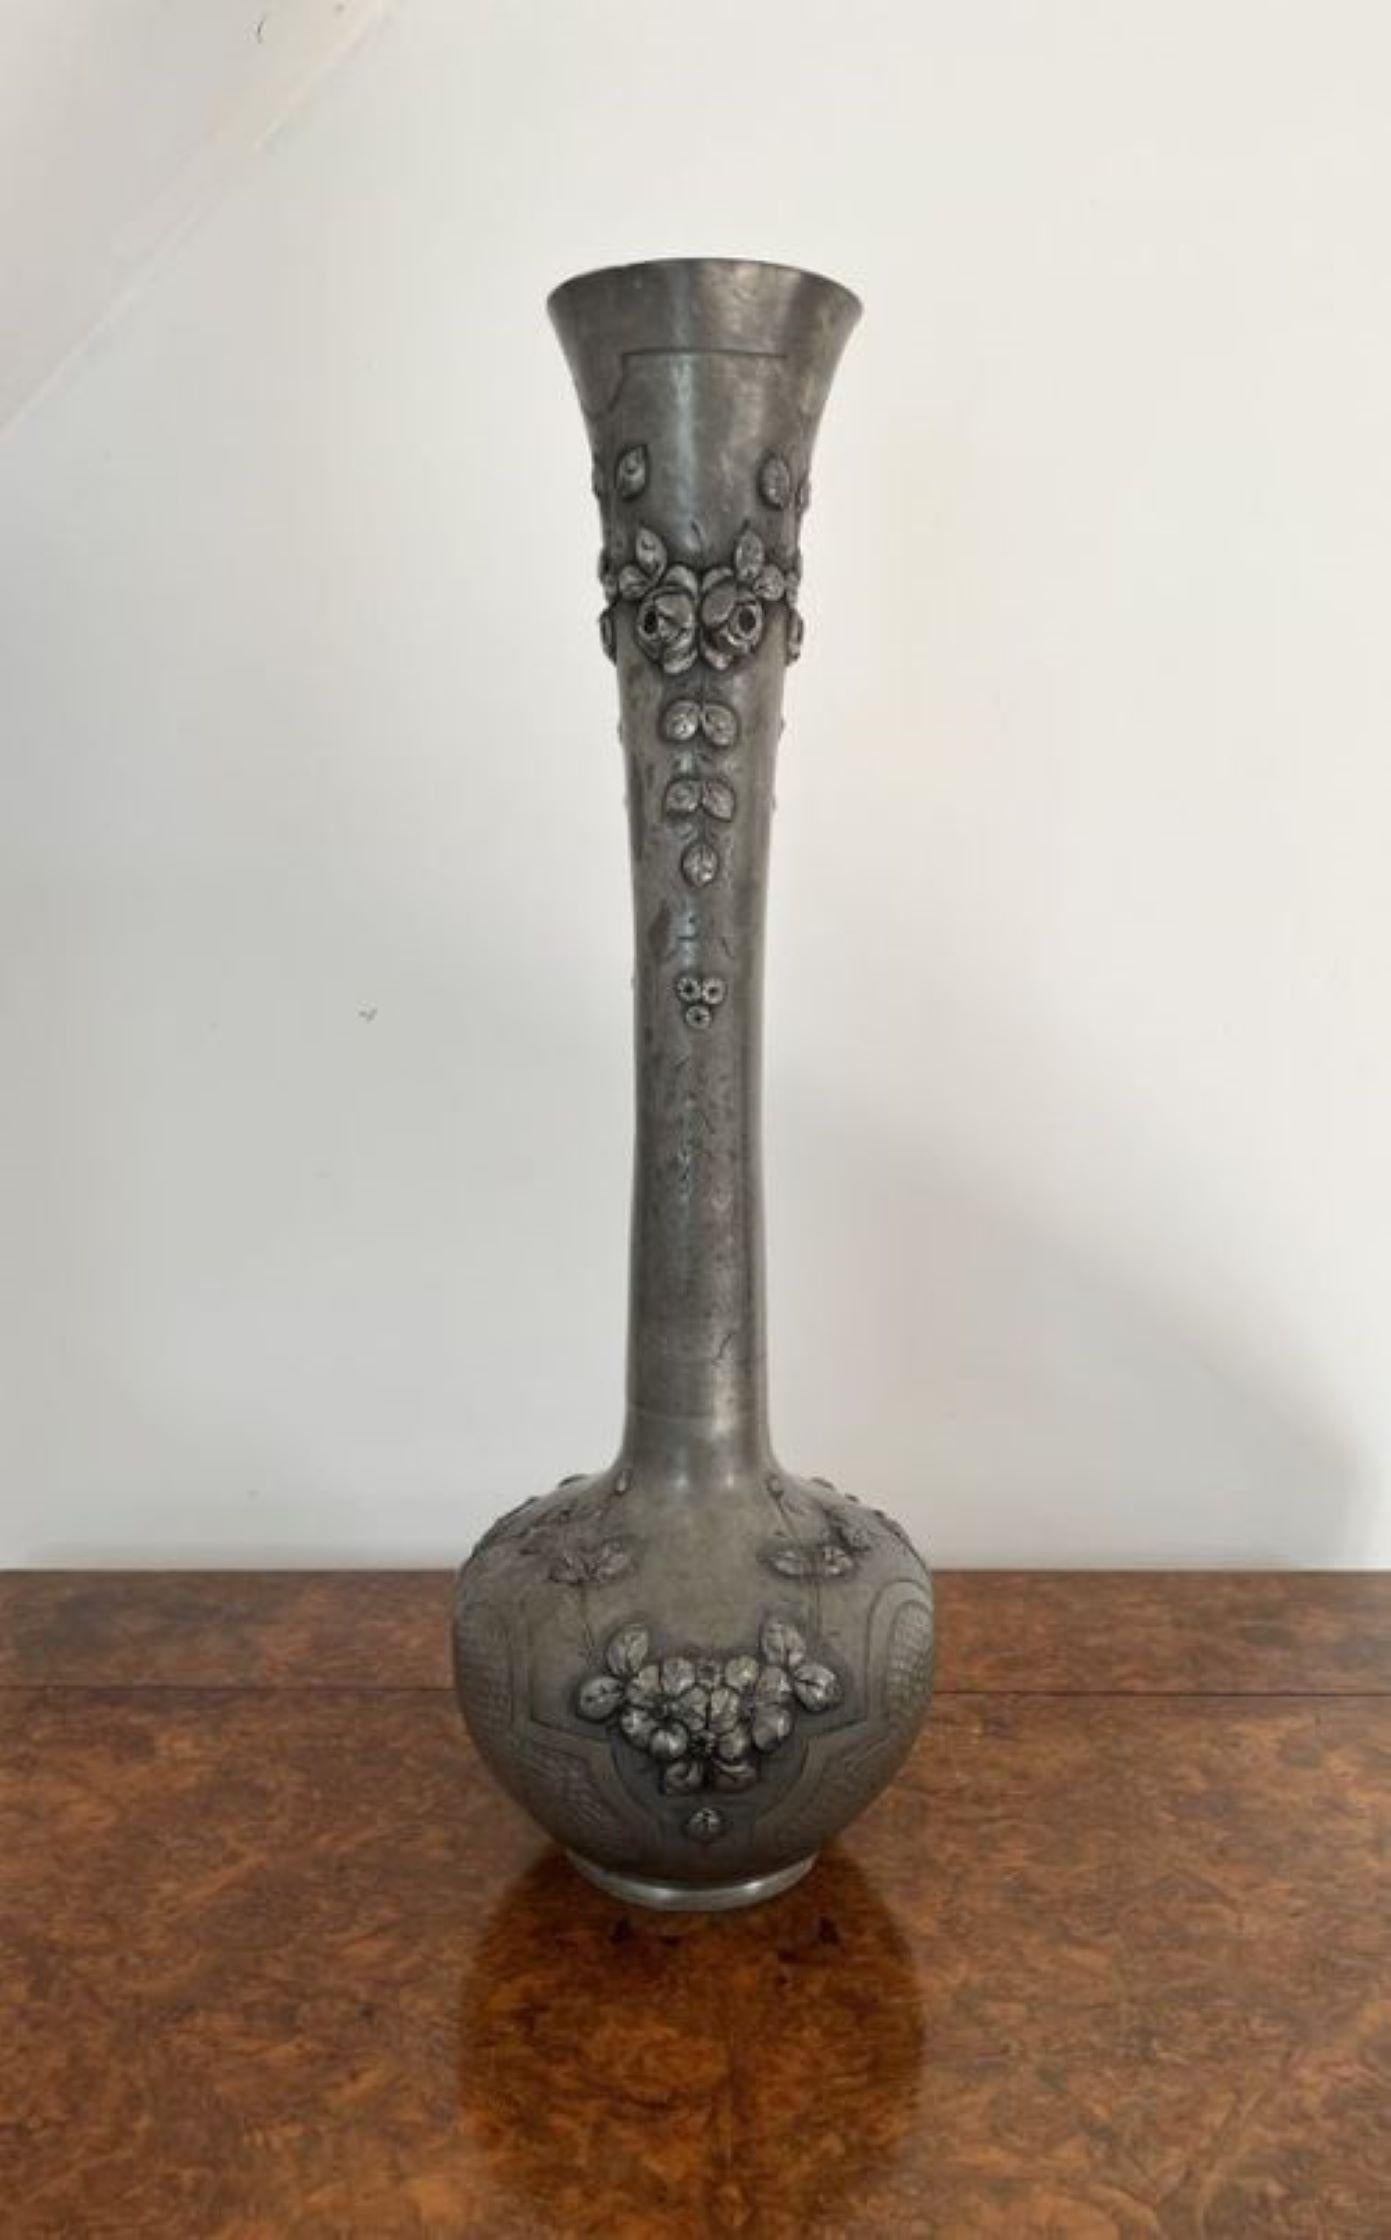 Large antique 19th century French quality pewter vase having a quality 19th century French large pewter vase with stunning embossed flower detail, with a bulbous body and a fluted neck.